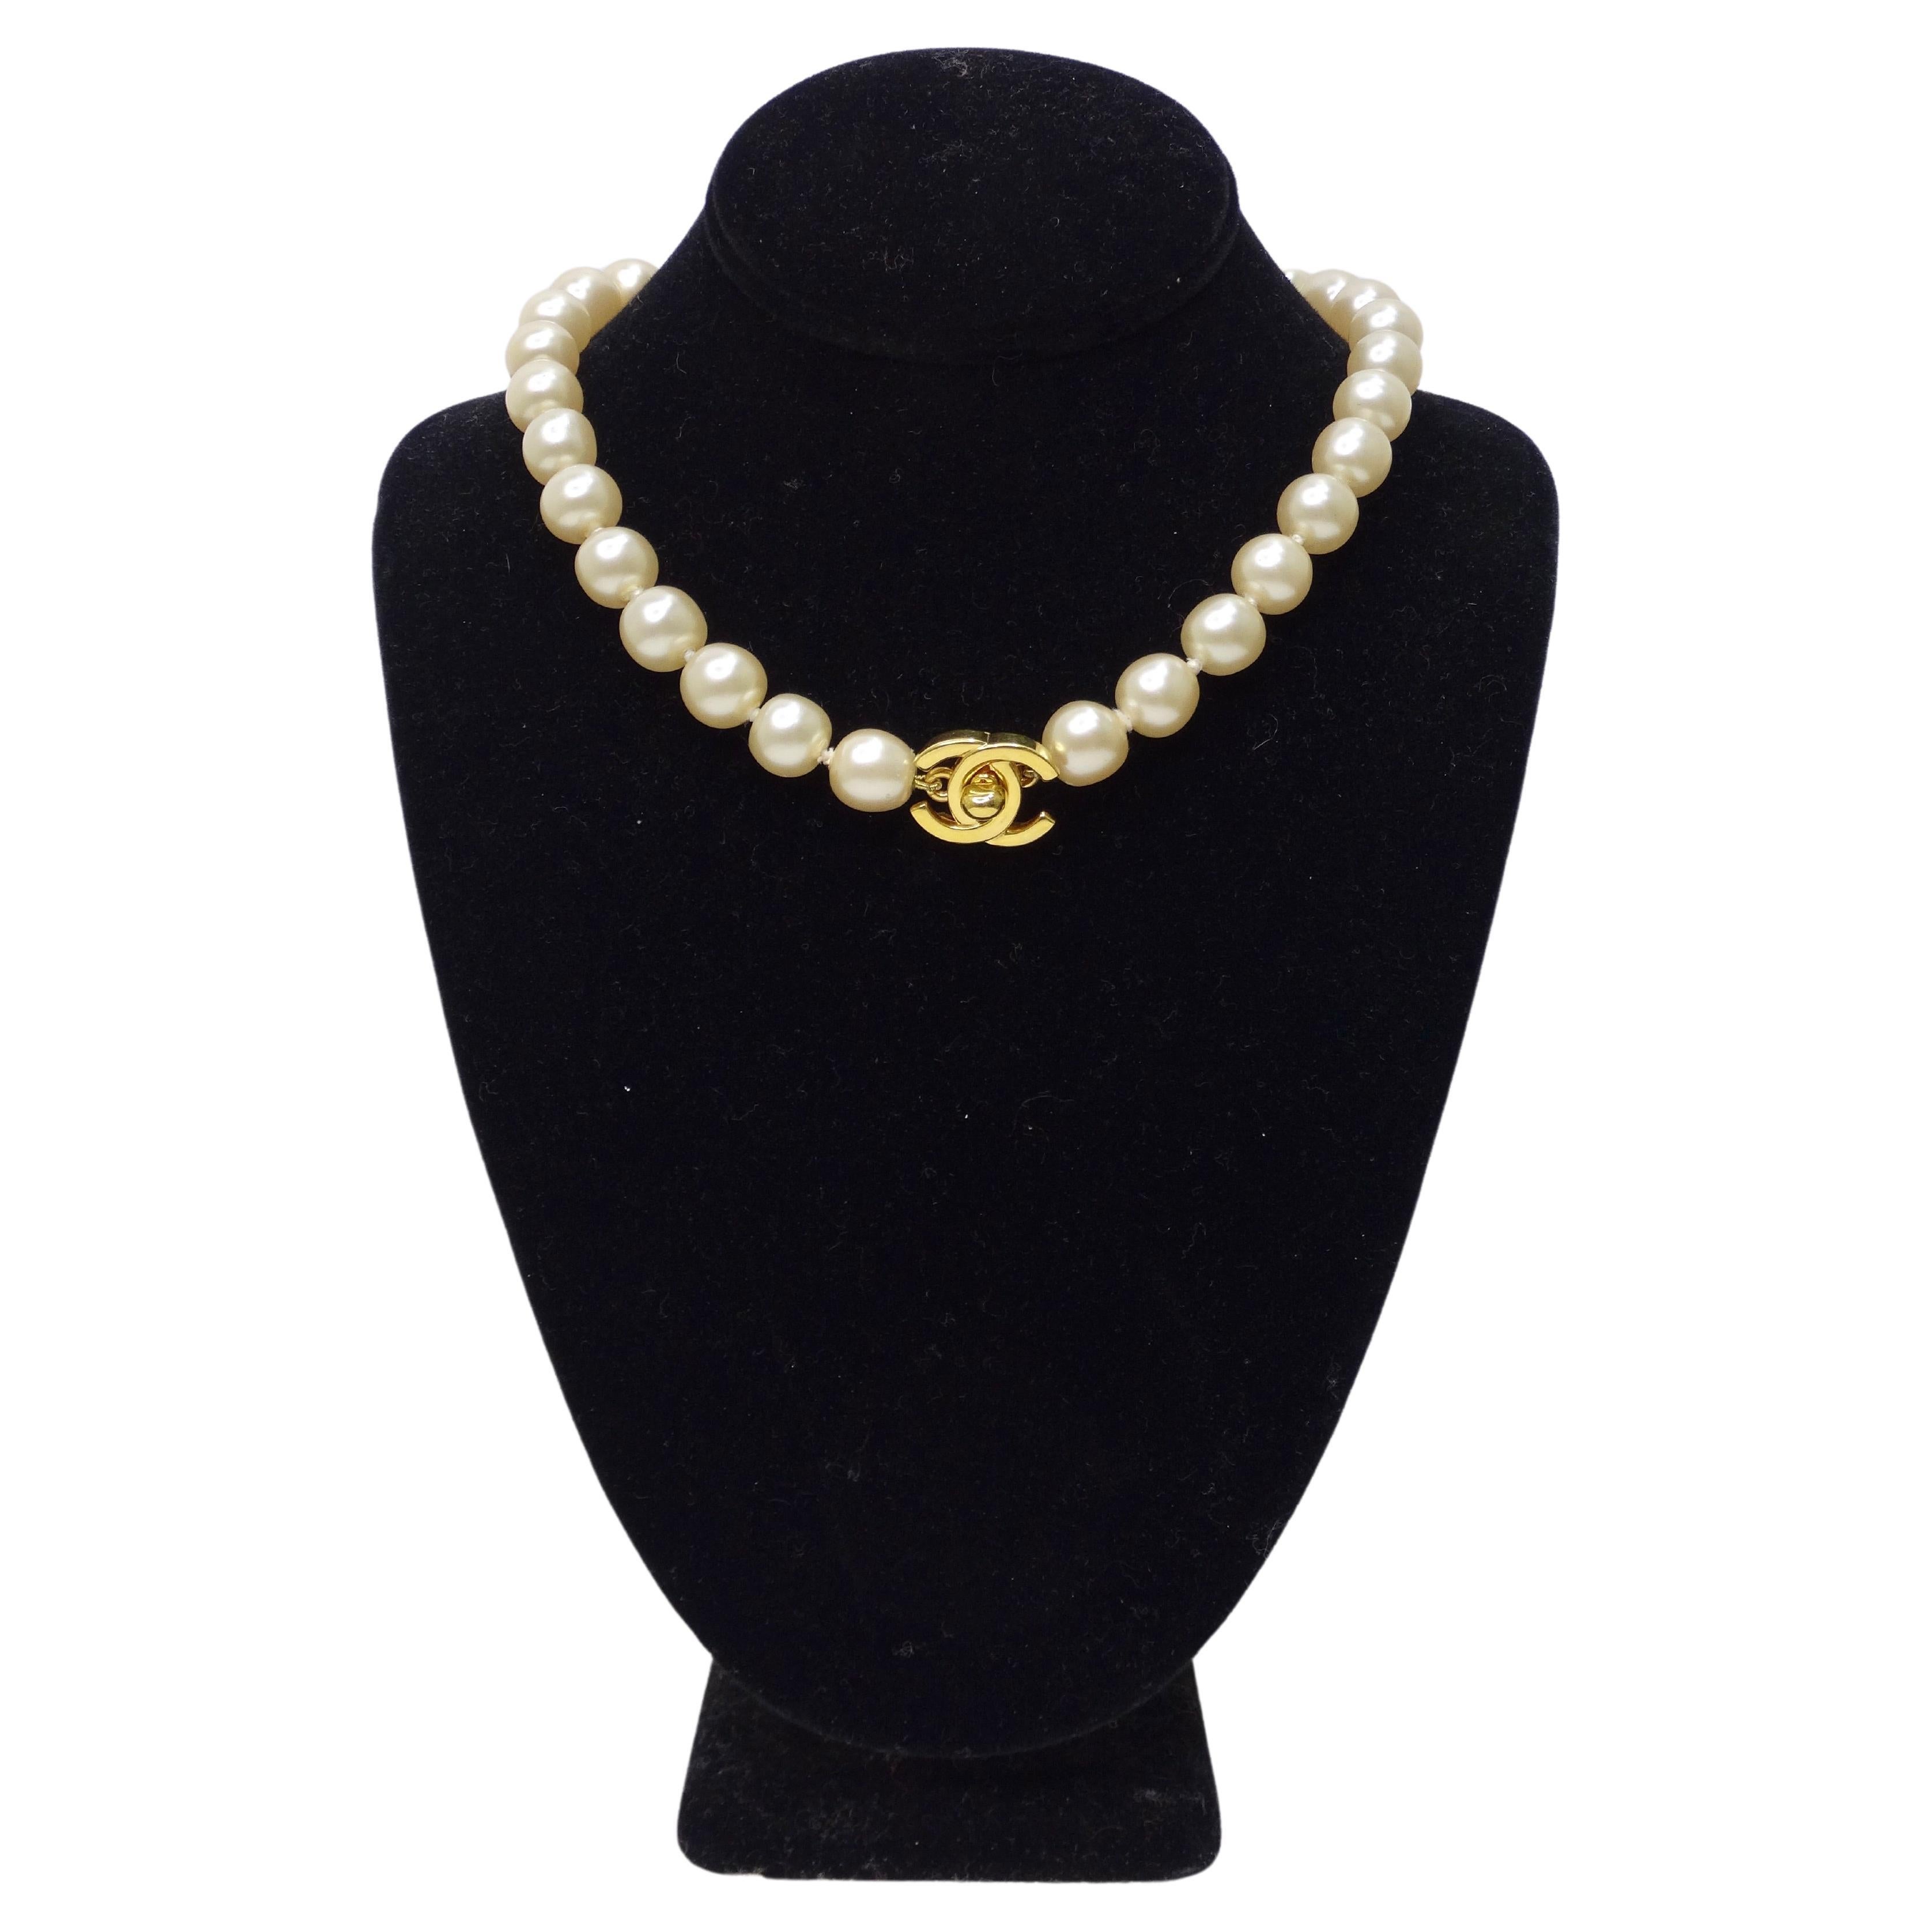 Chanel Rare Vintage Turnlock Pearl Choker Necklace